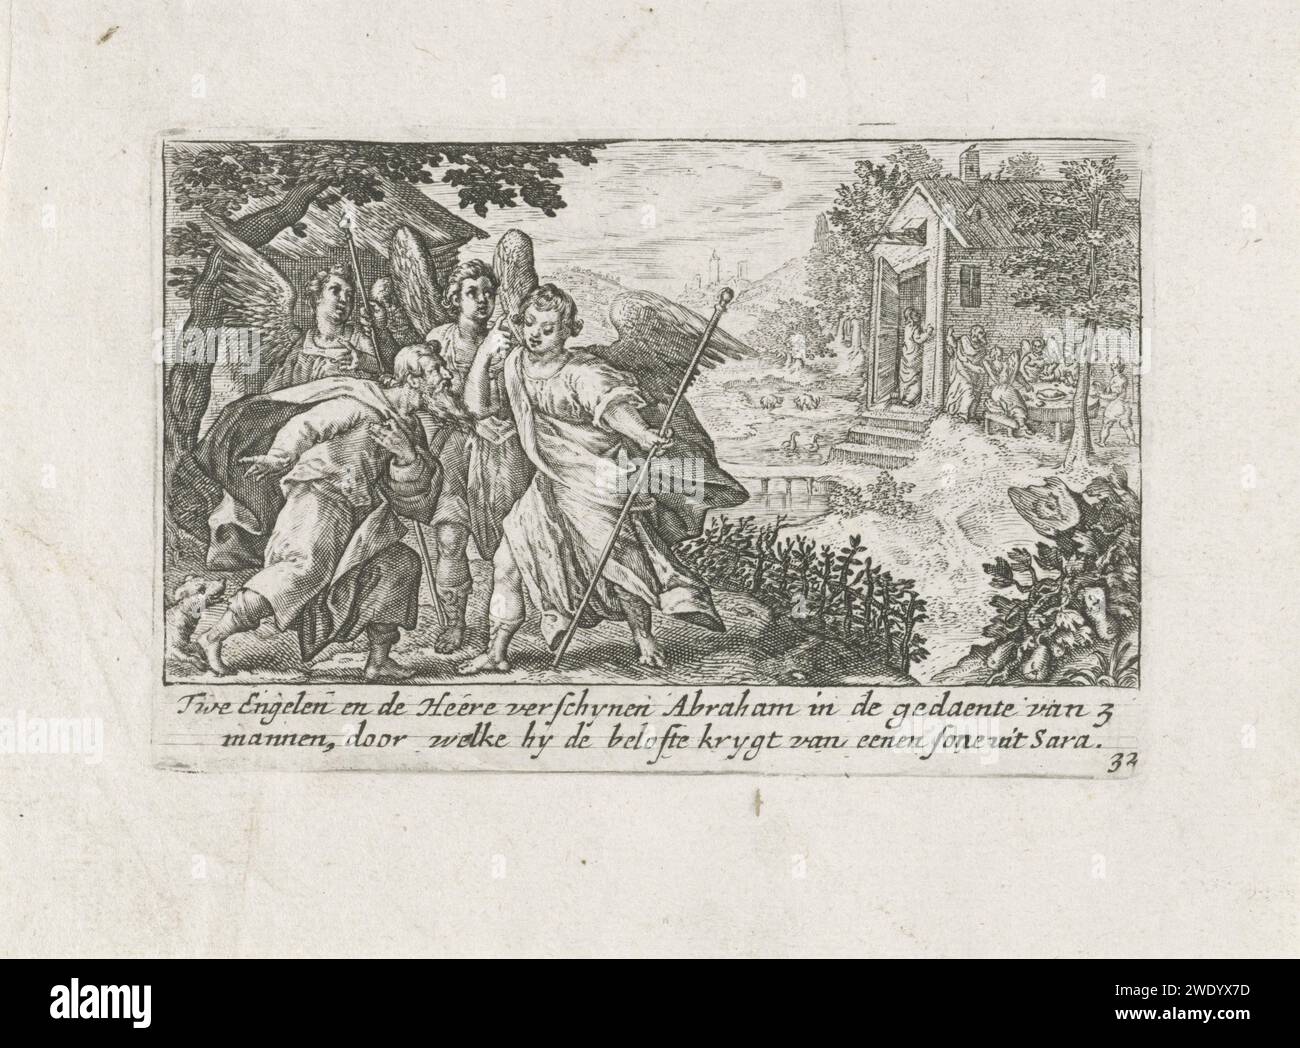 De Drie Engelen, Crispijn van de Passe (I), 1700 - 1750 print Abraham kneels for the three angels who visit him and predict that his wife Sara will have a son. In the margin a two -way caption in Dutch. print maker: Utrechtpublisher: Amsterdam paper engraving Abraham kneels before the angels Stock Photo